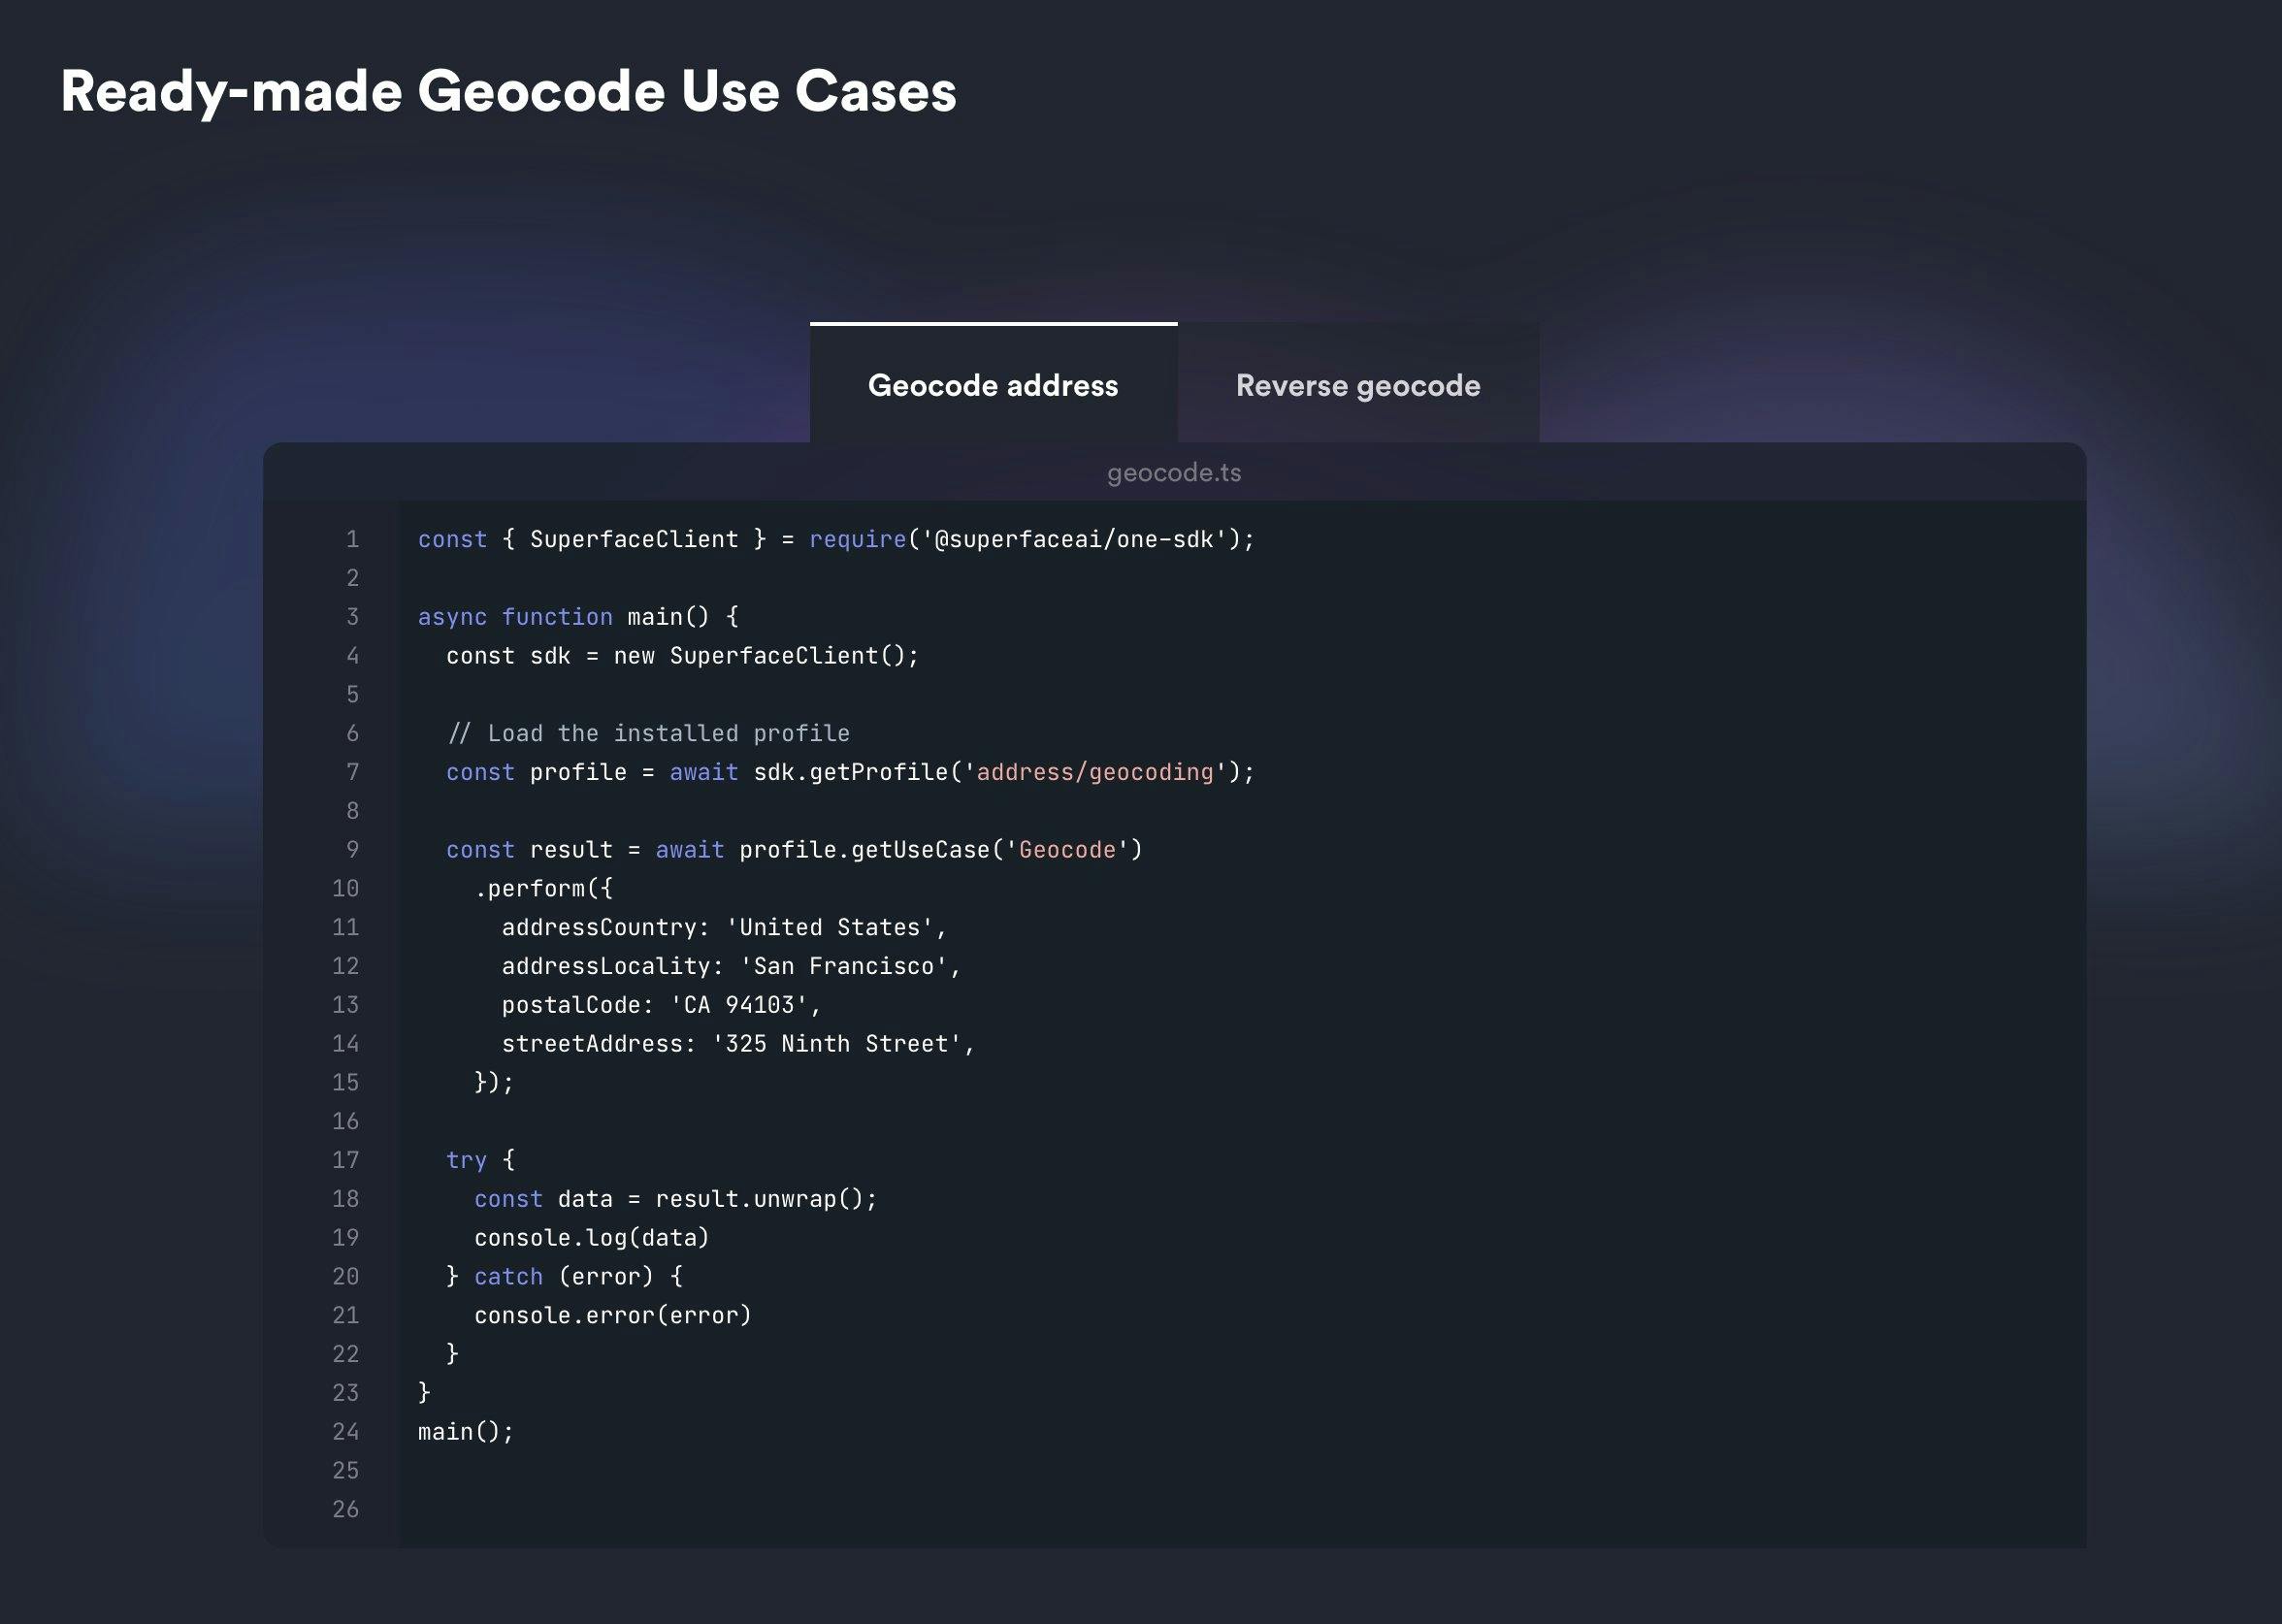 Screenshot of Ready-made Geocode Use Cases with example code